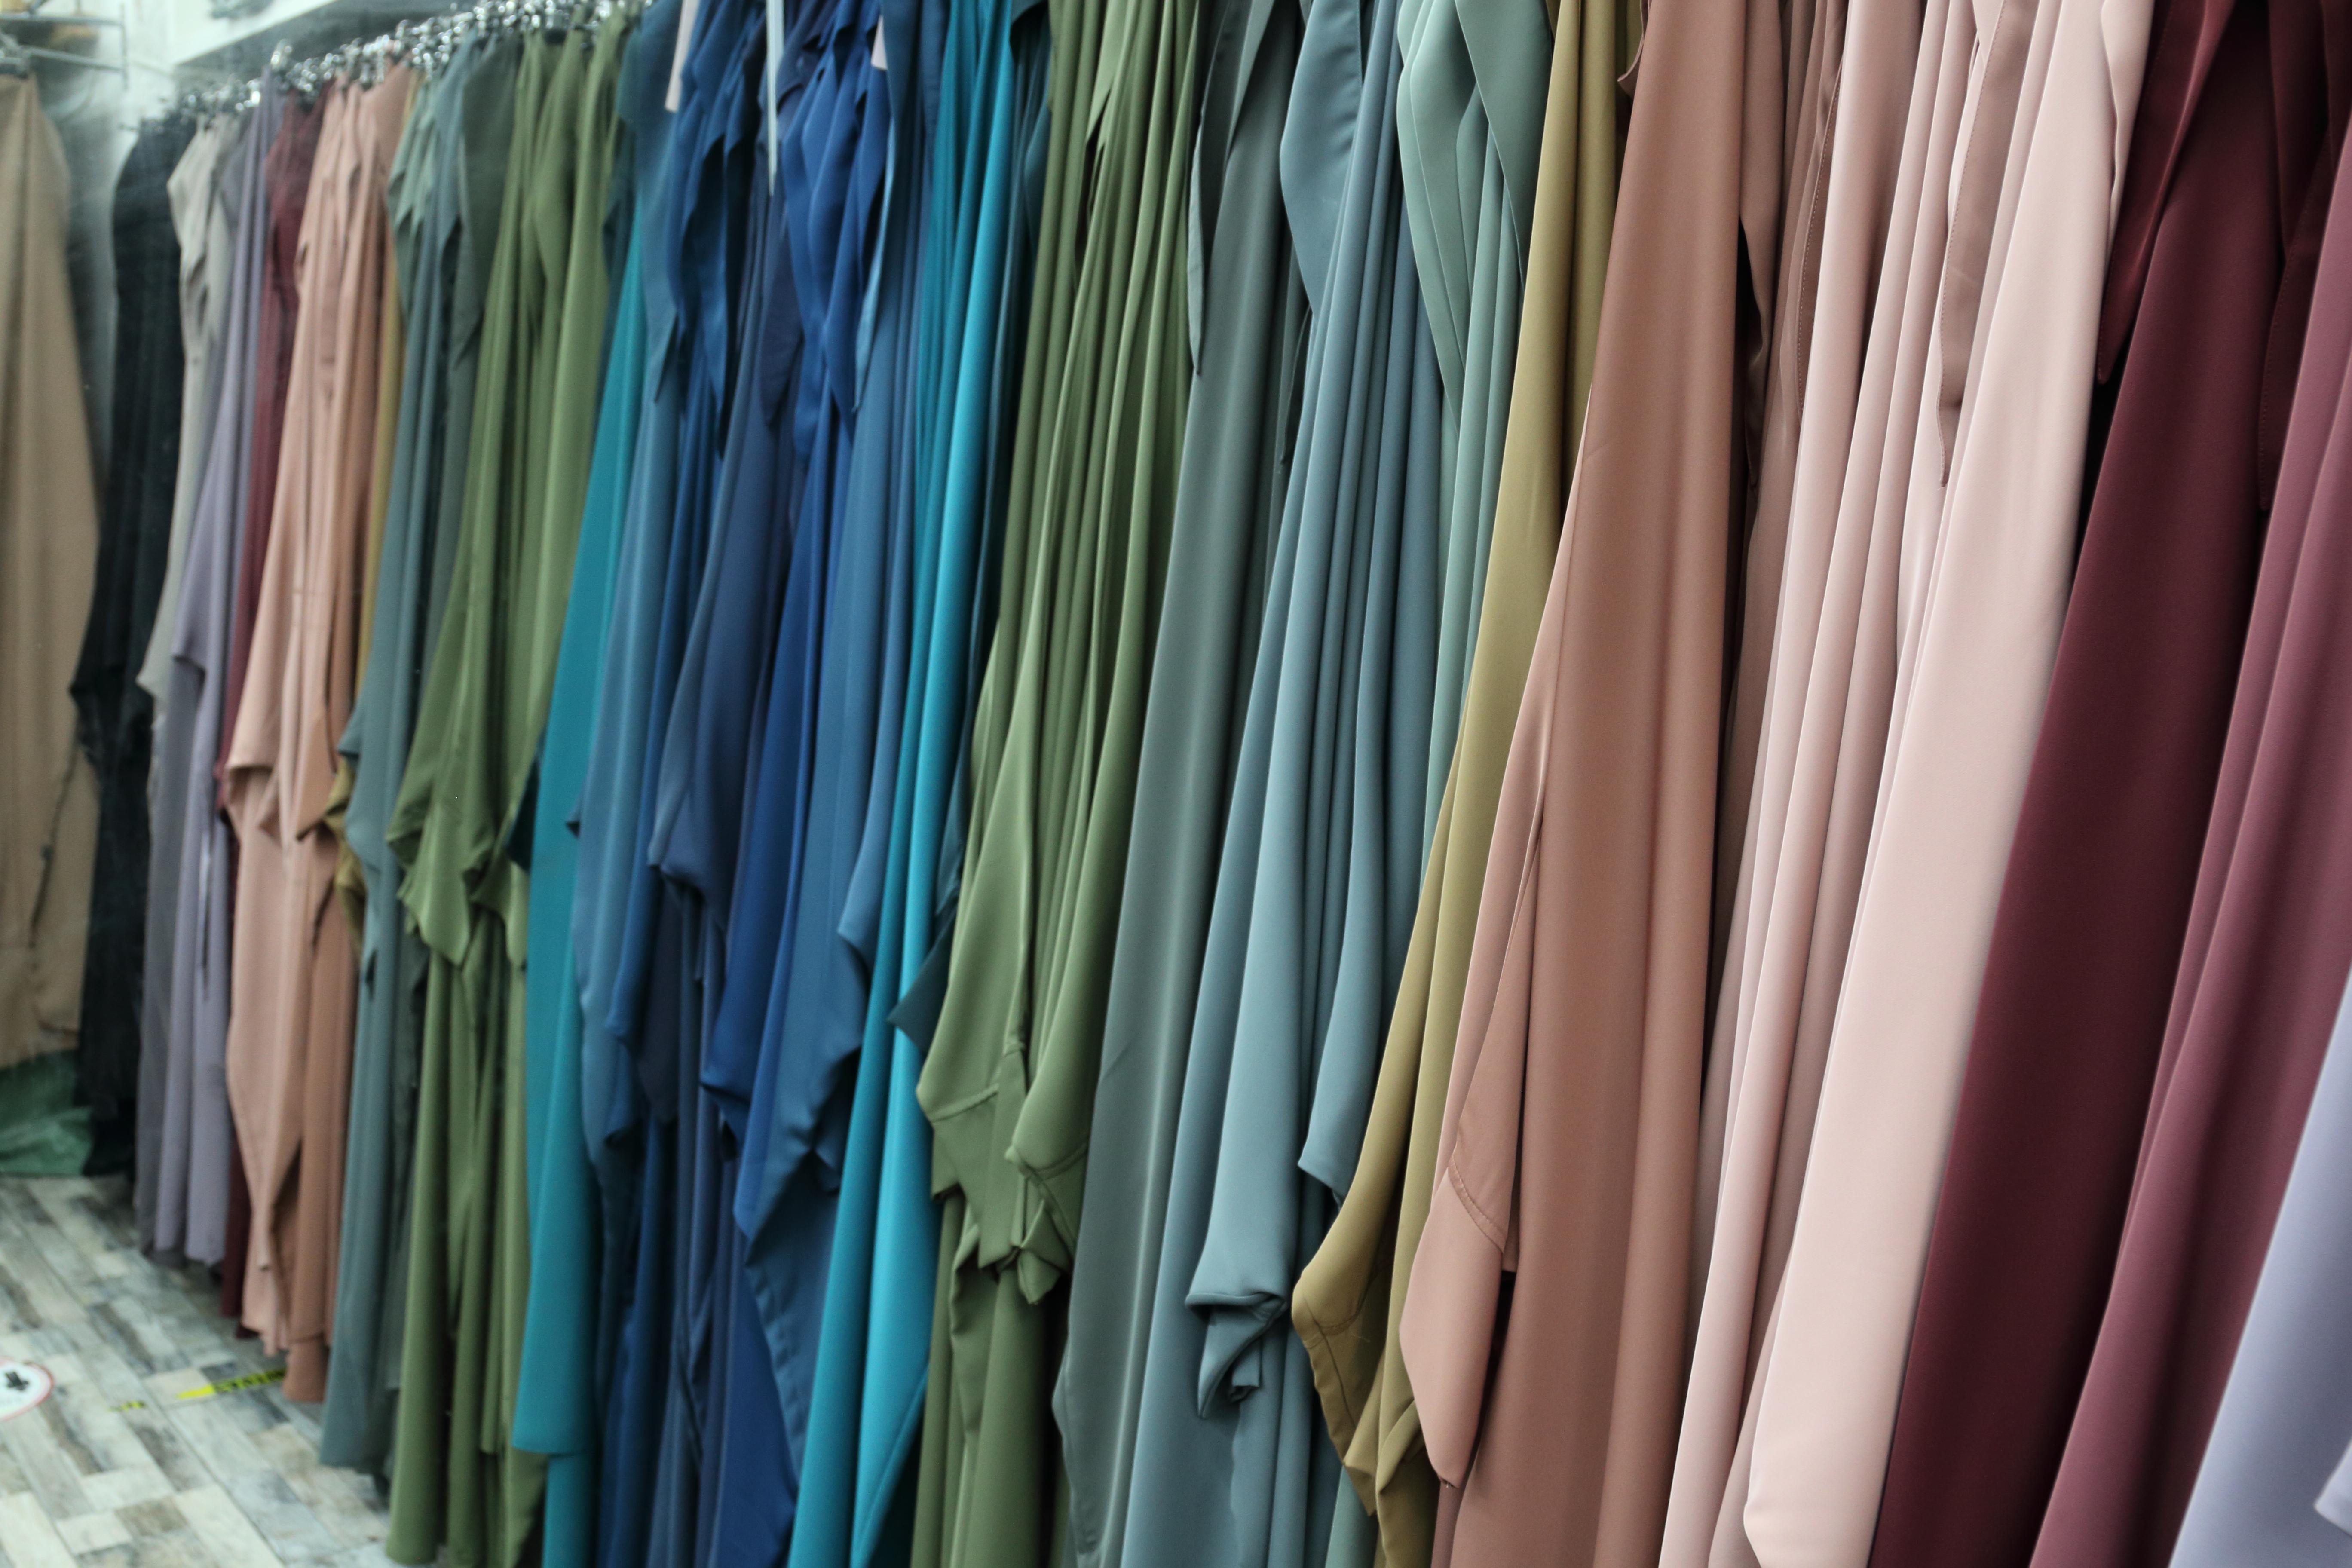 Colour image showing Muslim modesty wear clothing in fine fabrics, in a variety of colours including blues, greens, greys, ochres, browns.